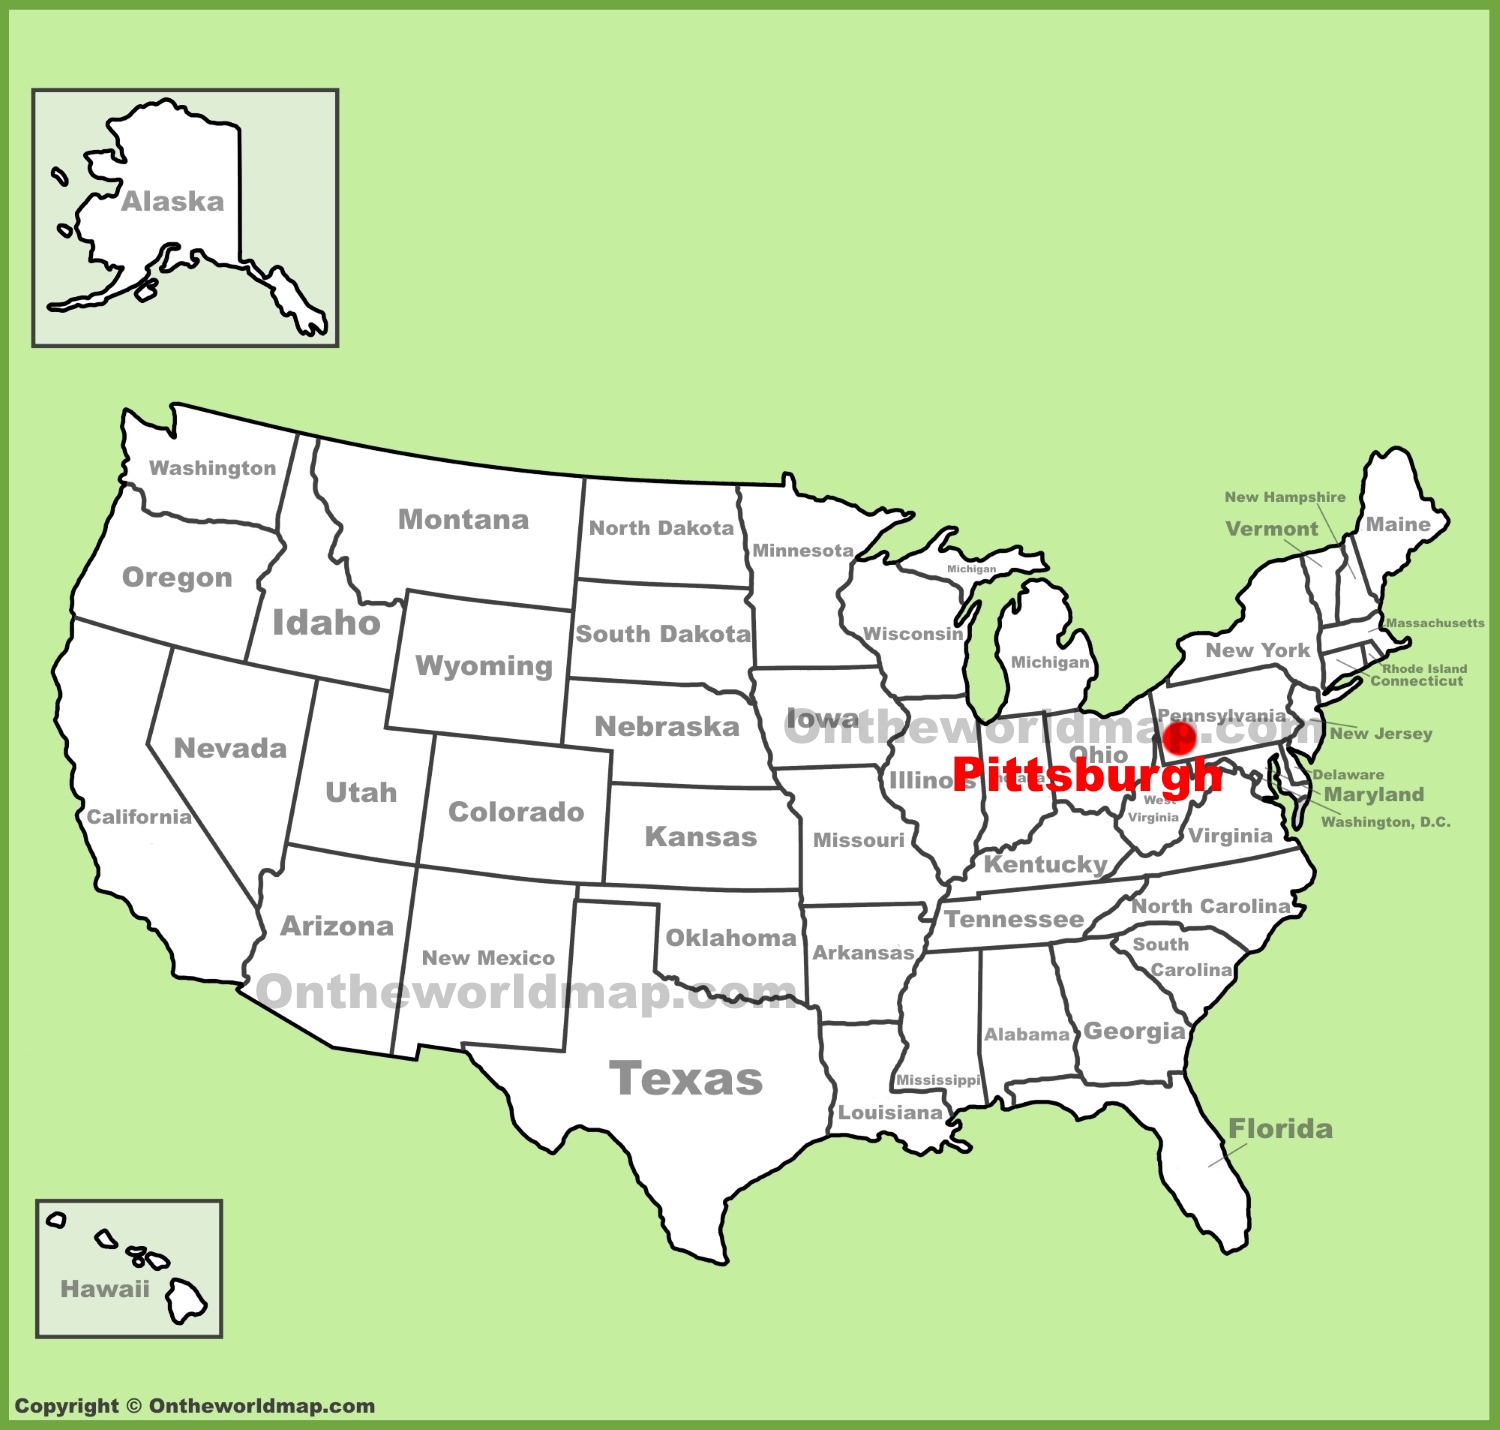 Pittsburgh Location On The U S Map